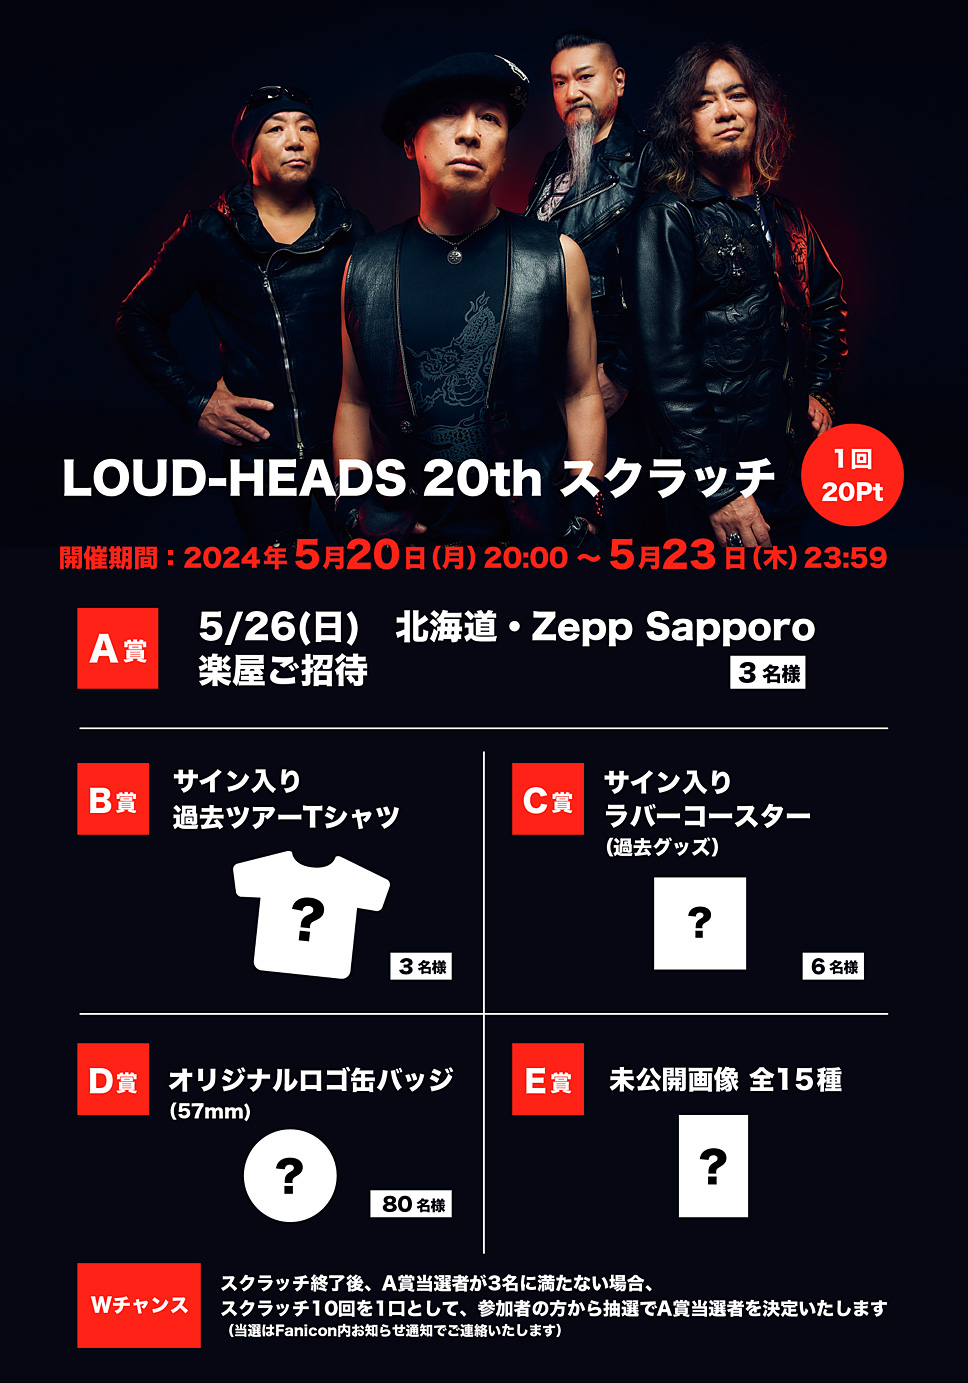 LOUDNESSグッズ